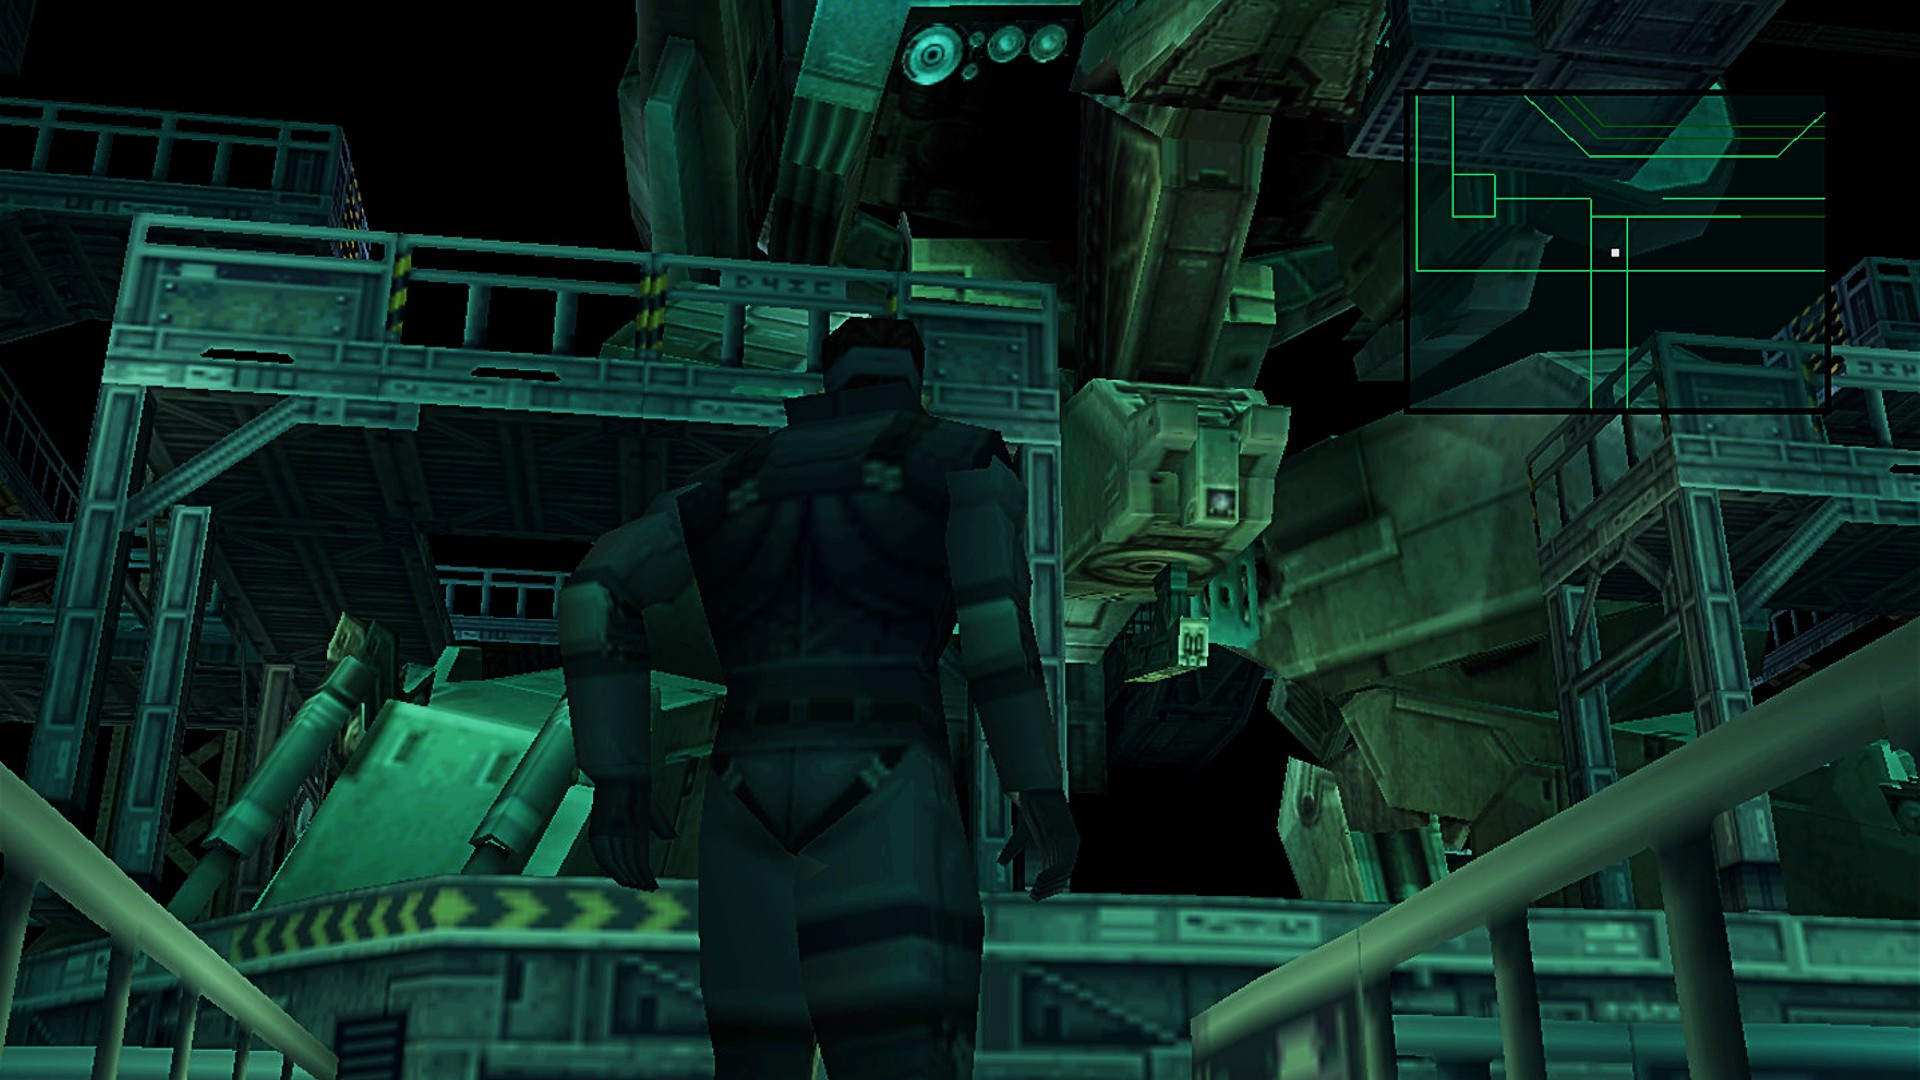 Solid Snake looks to REX